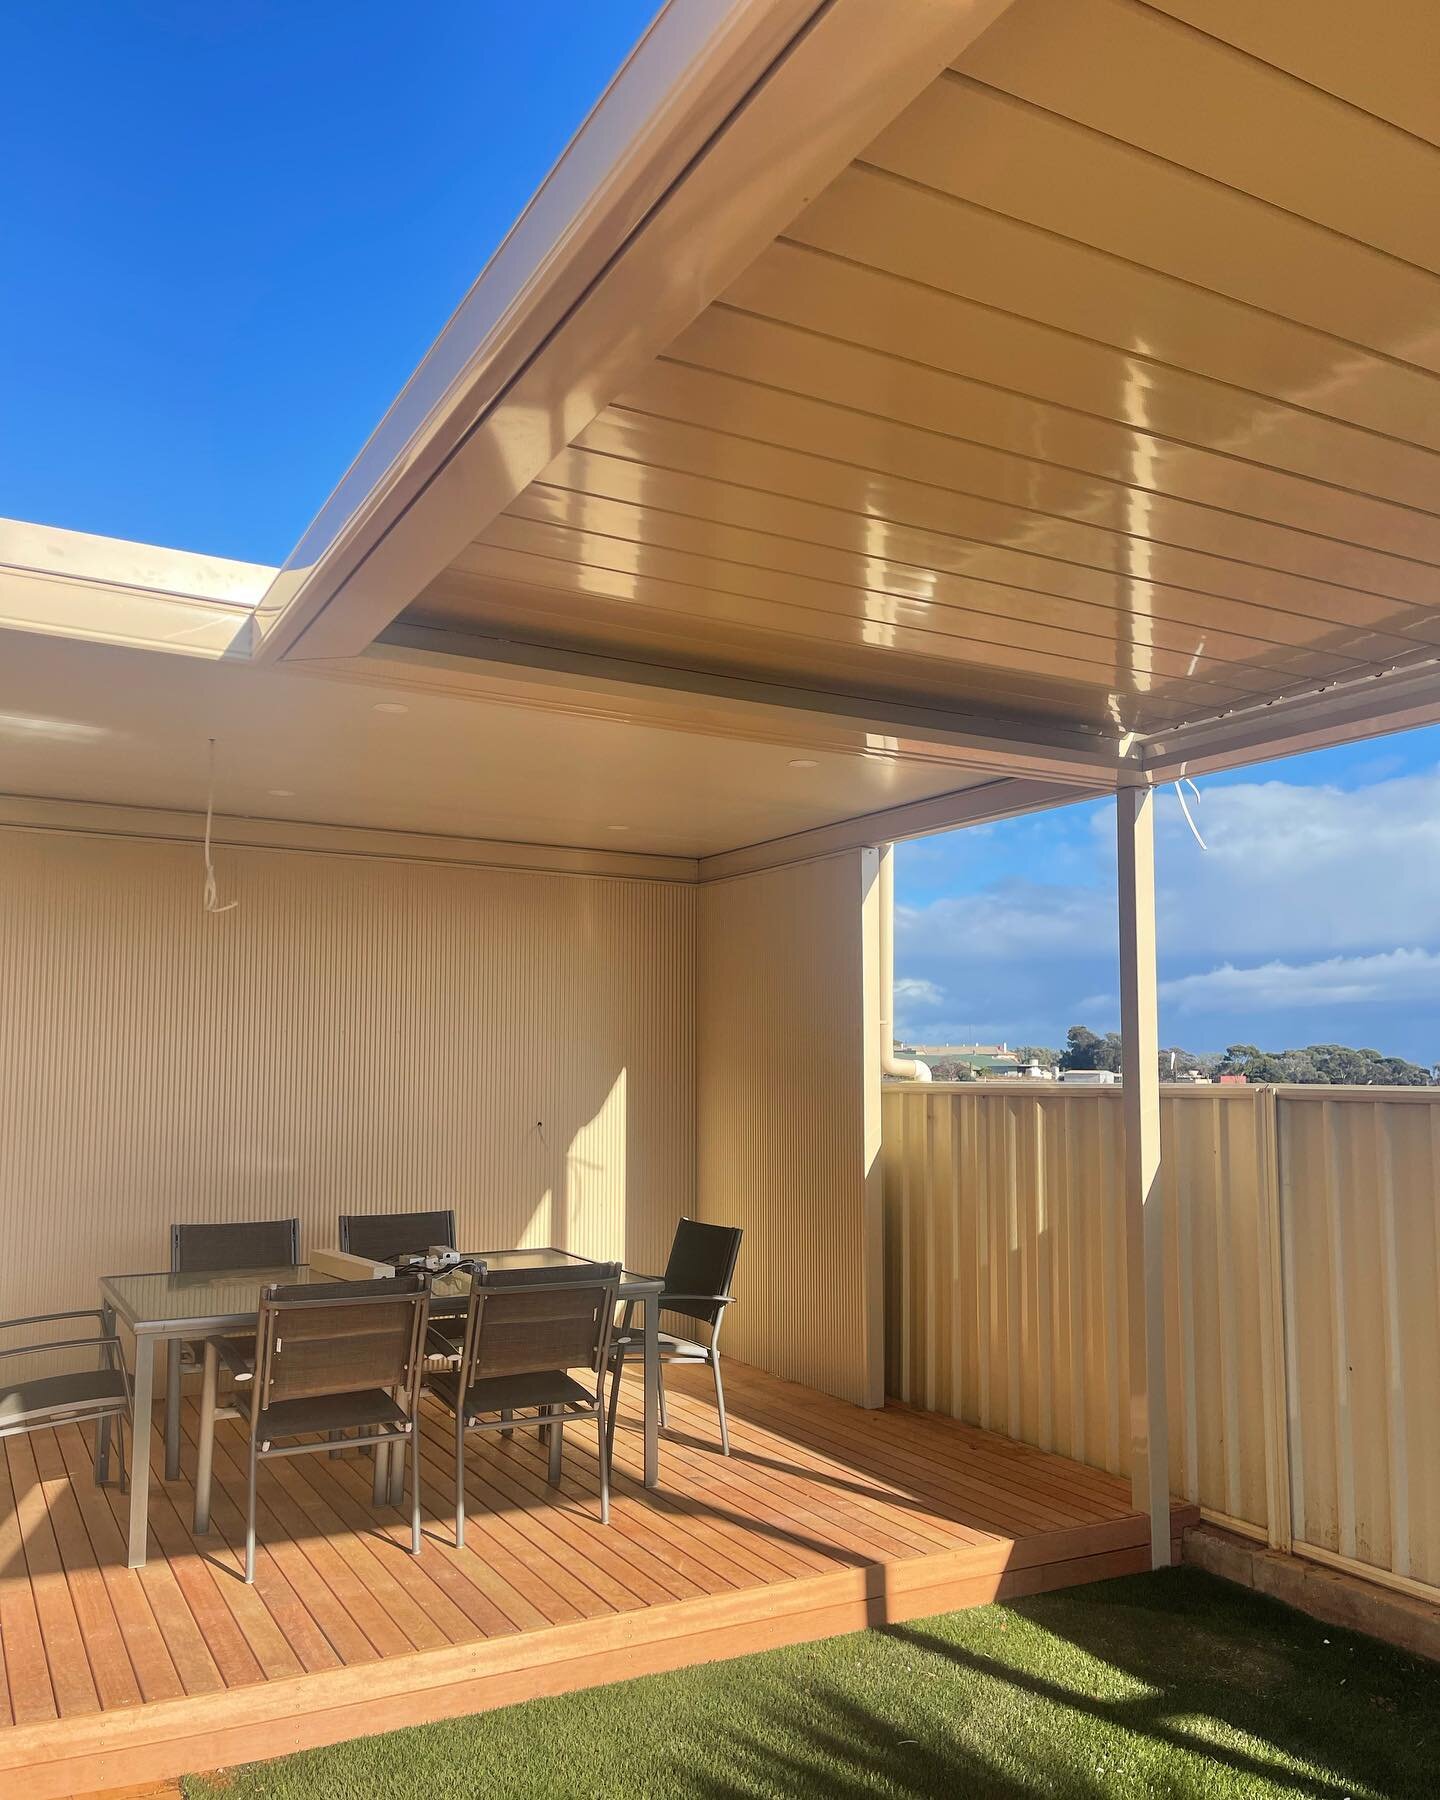 Replaced this clients dated timber pergola and decking area with a @stratcoaustralia Cooldek and opening flat roof, finished off with Downlights, mini orb wall and hardwood decking. Perfect for summer ☀️🍻